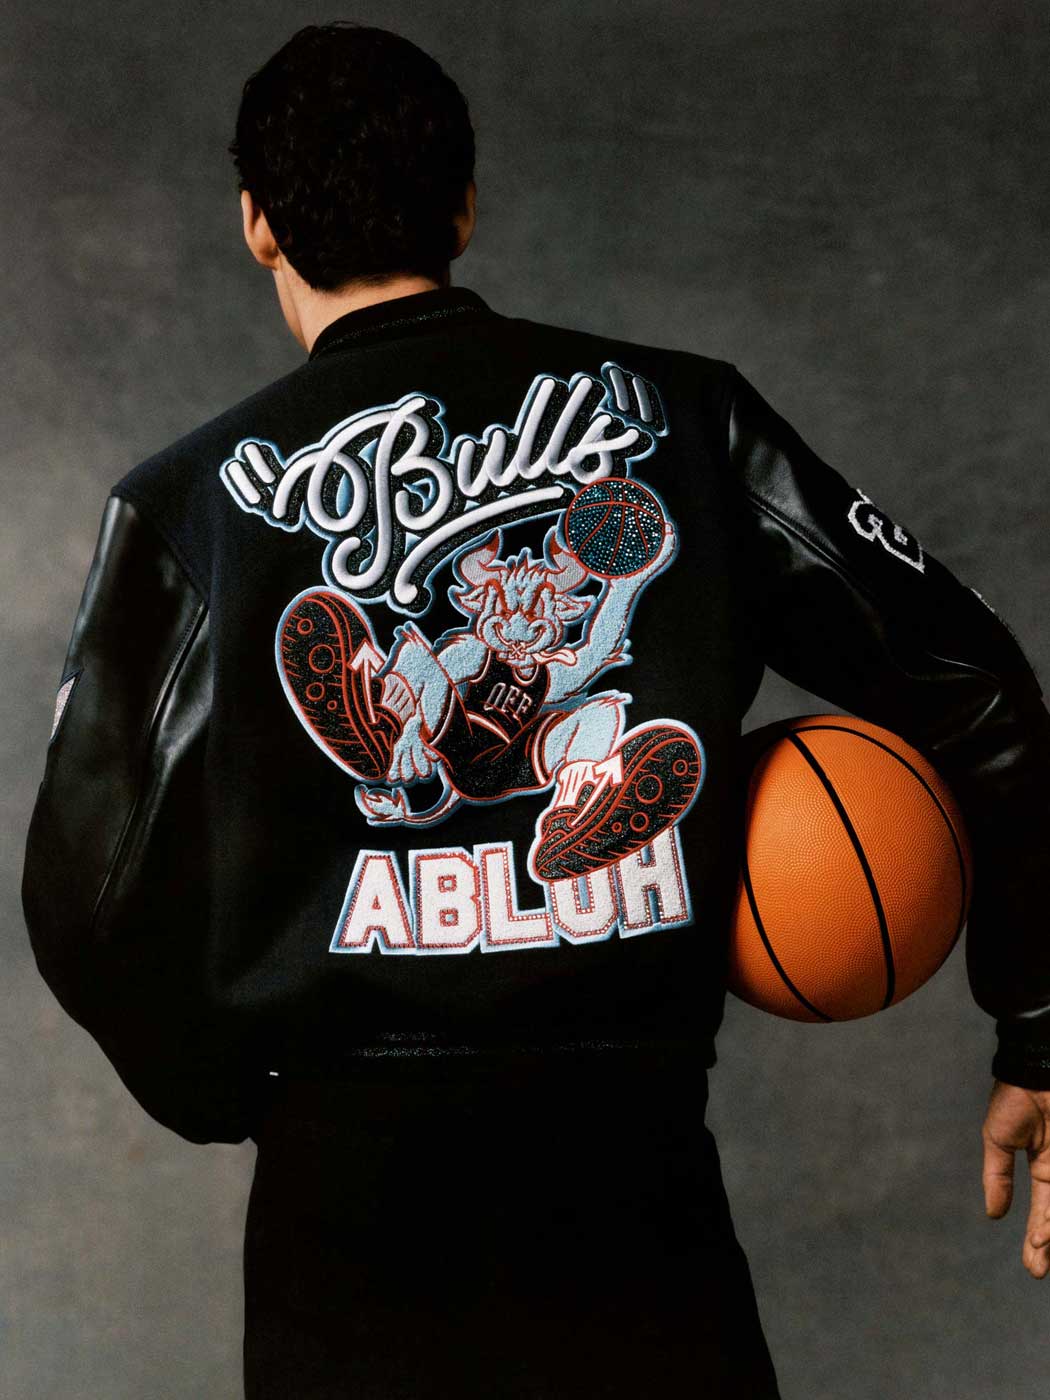 Chicago Bulls The Greatest Team Leather Jacket